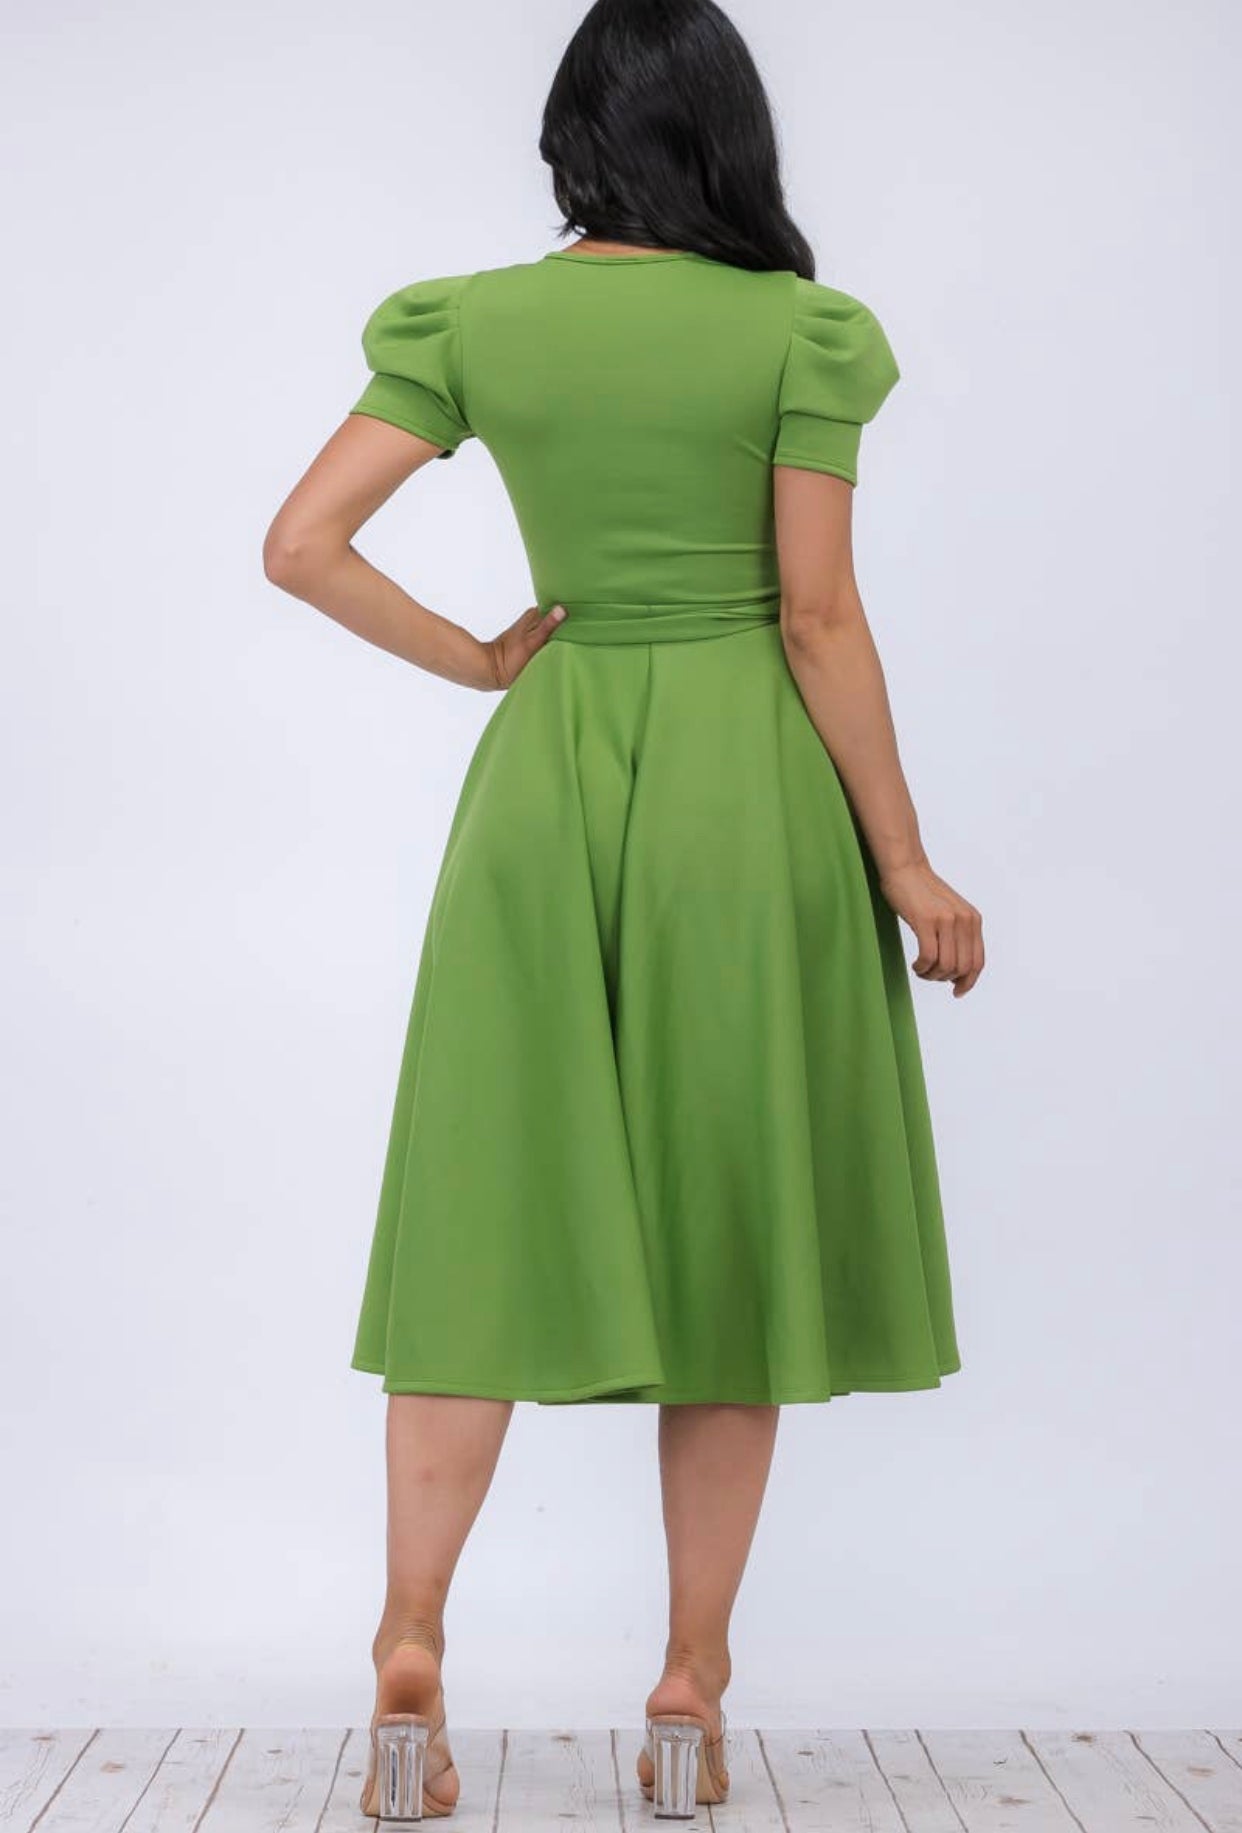 Puff Sleeve Cocktail Dress, Sizes 1X - 3X (Kelly Green)